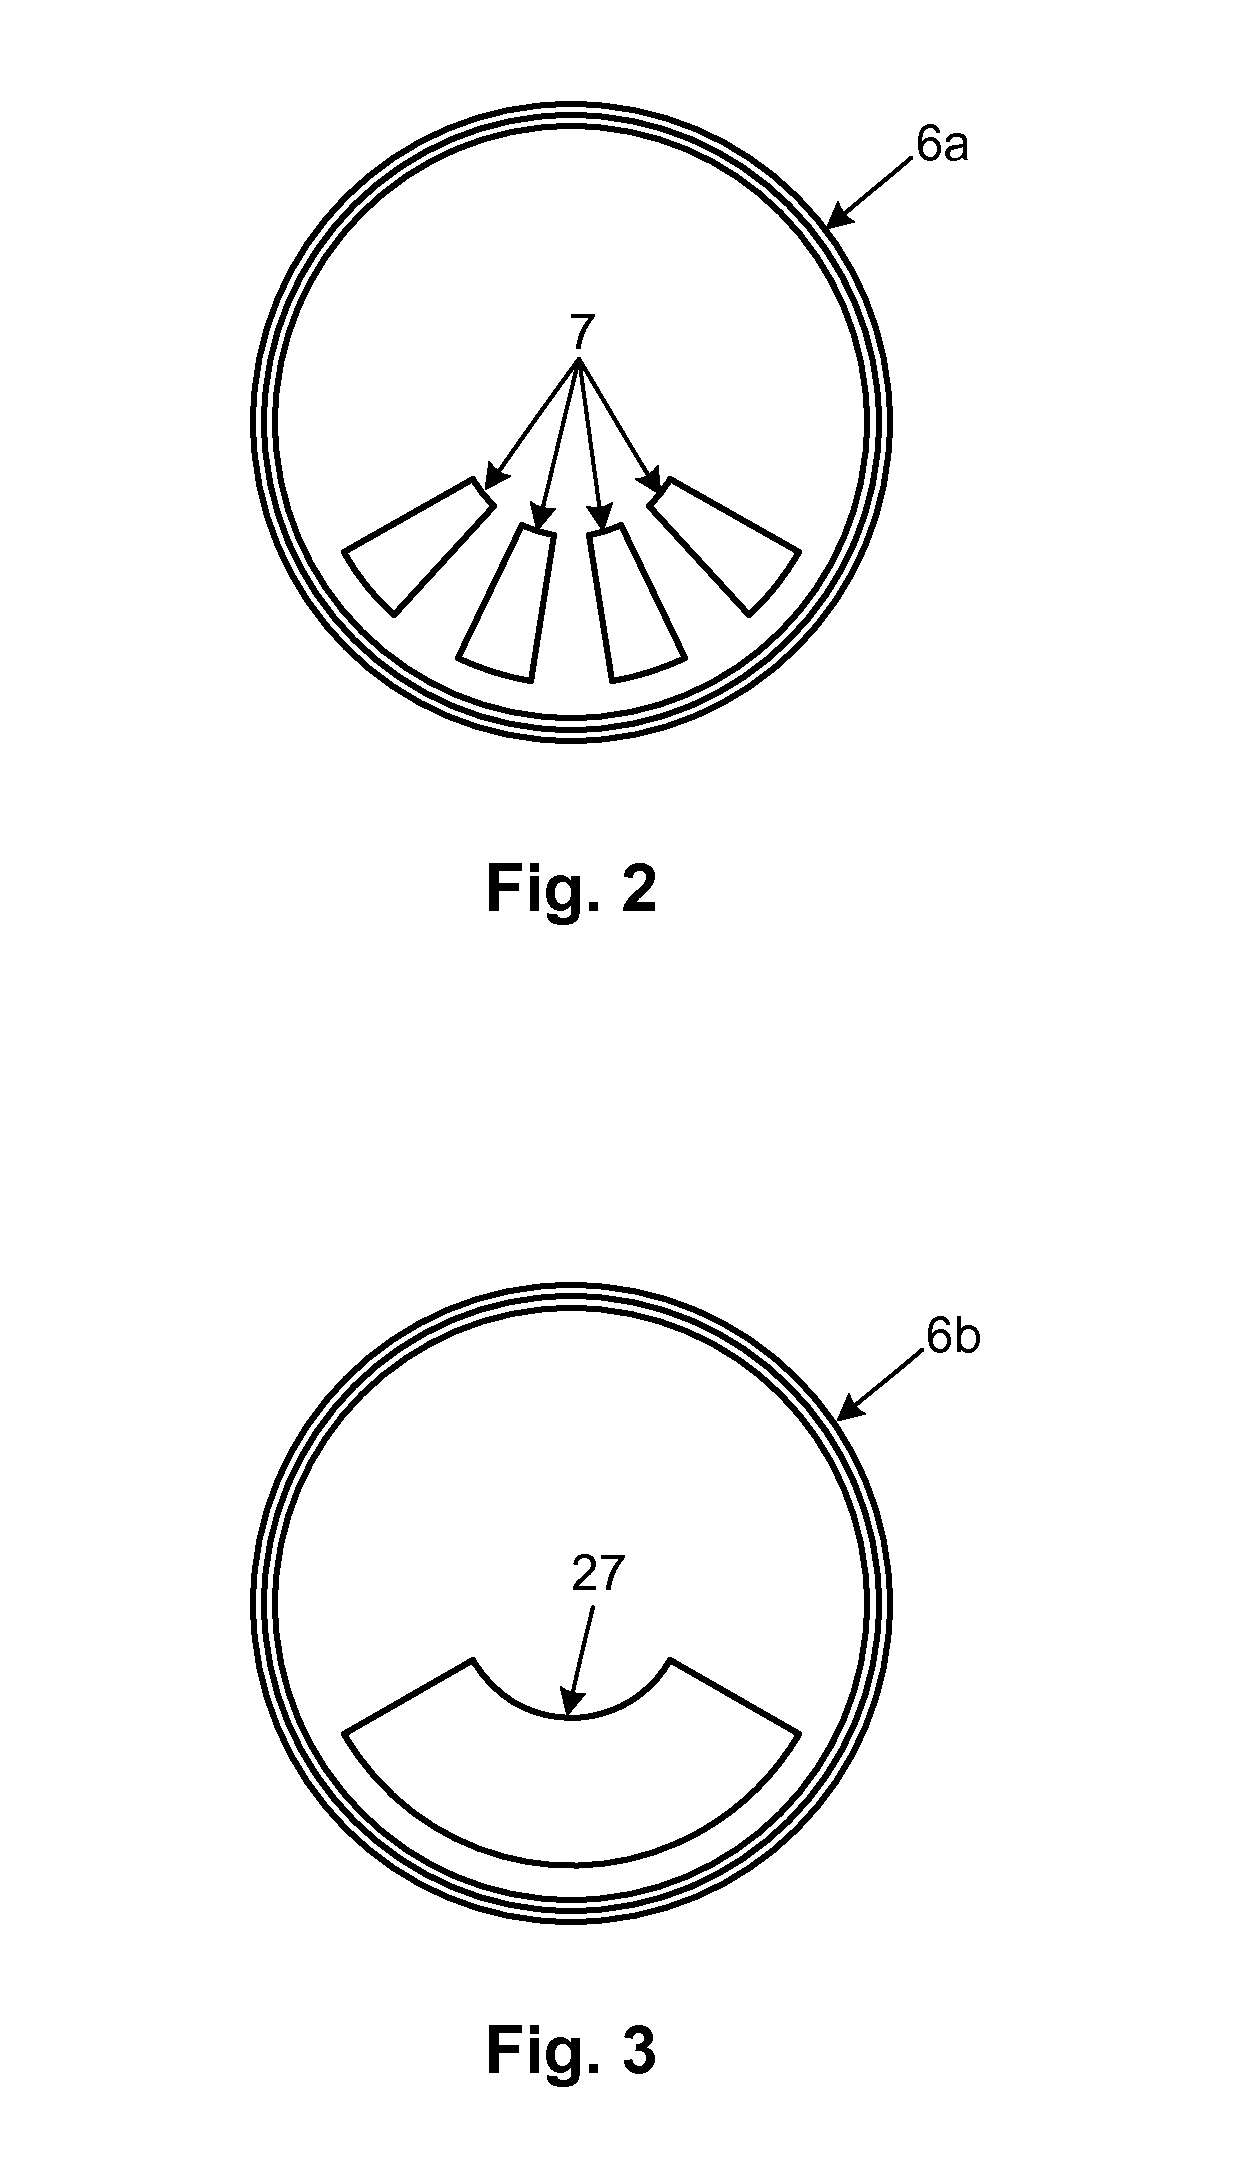 Apparatus and method for delivering beneficial liquids at a consistent rate